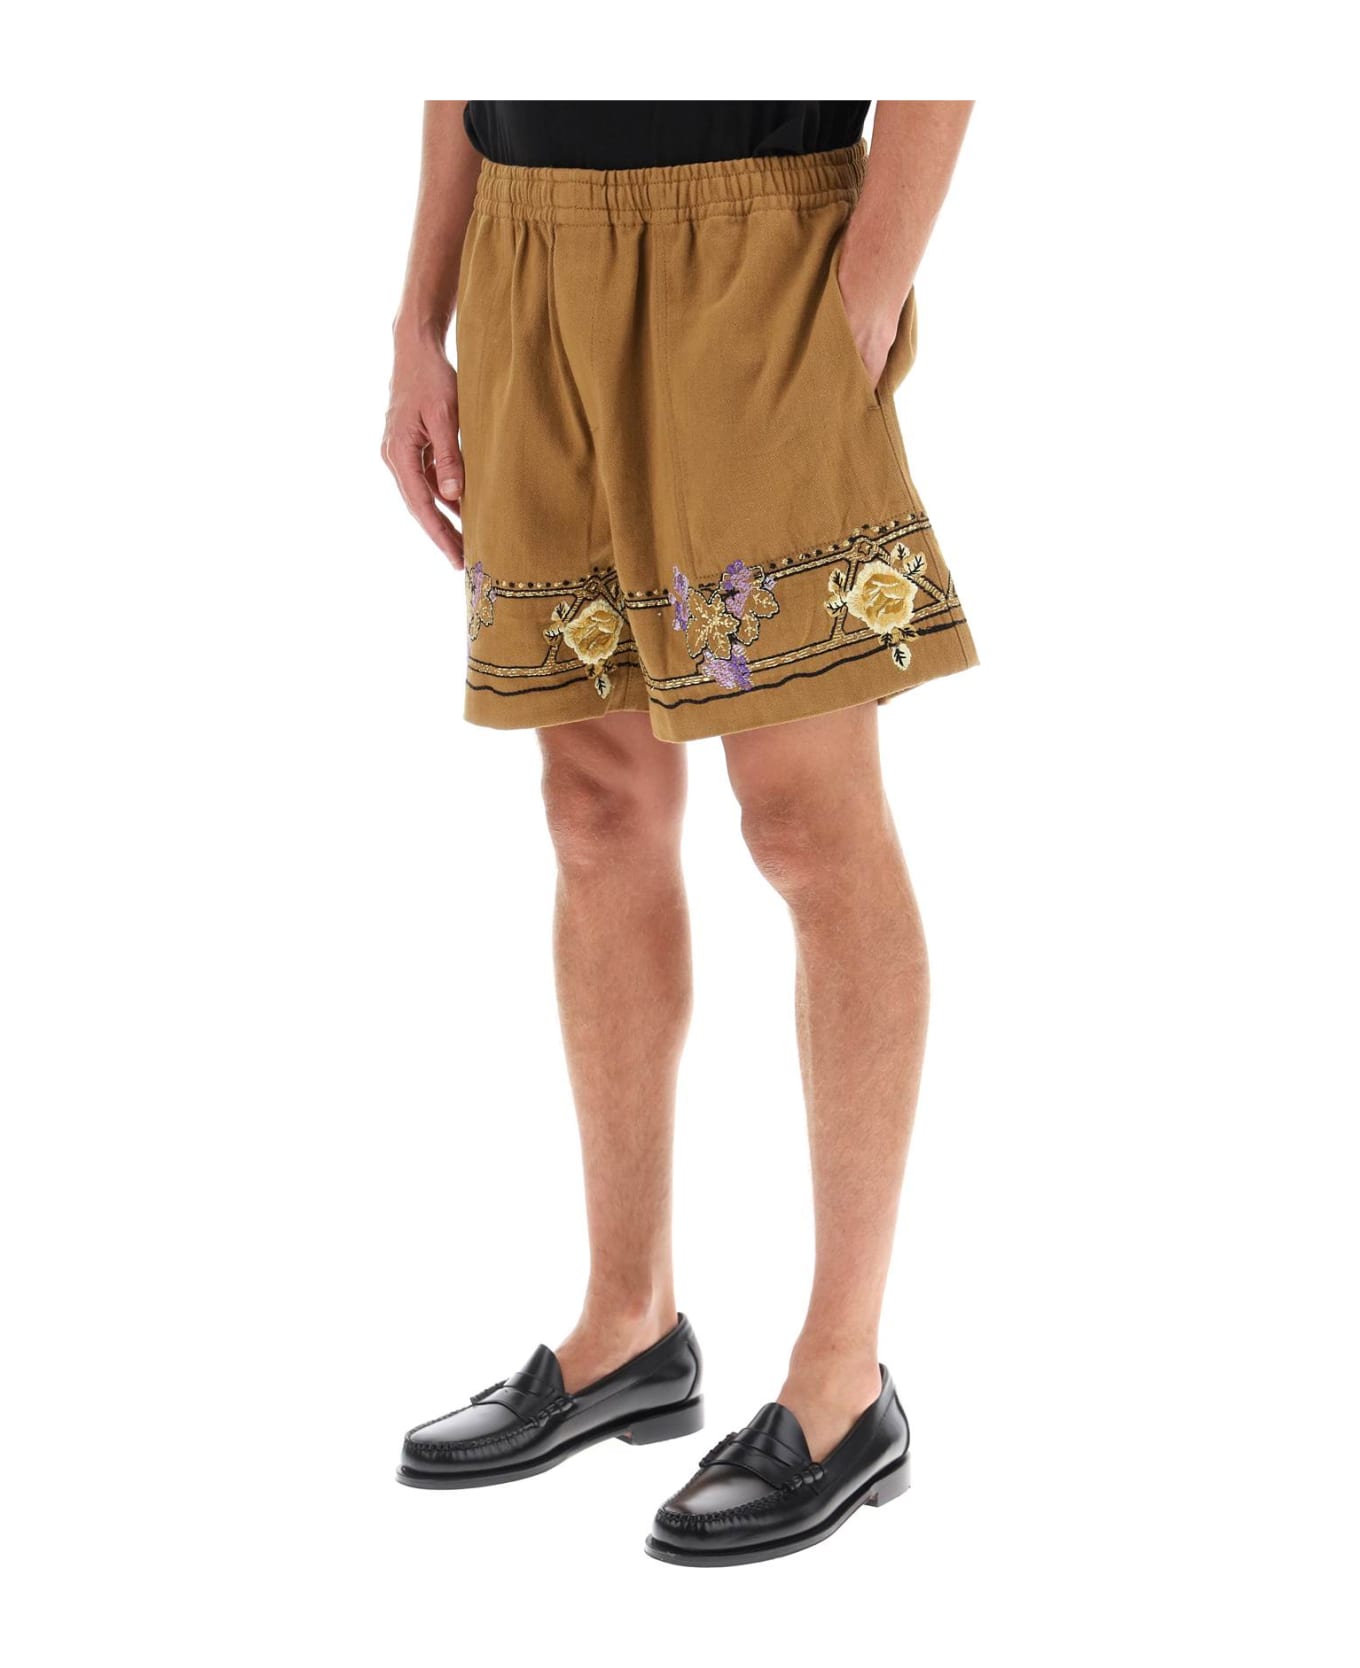 Bode Autumn Royal Shorts With Floral Embroideries - BROWN MULTI (Brown)